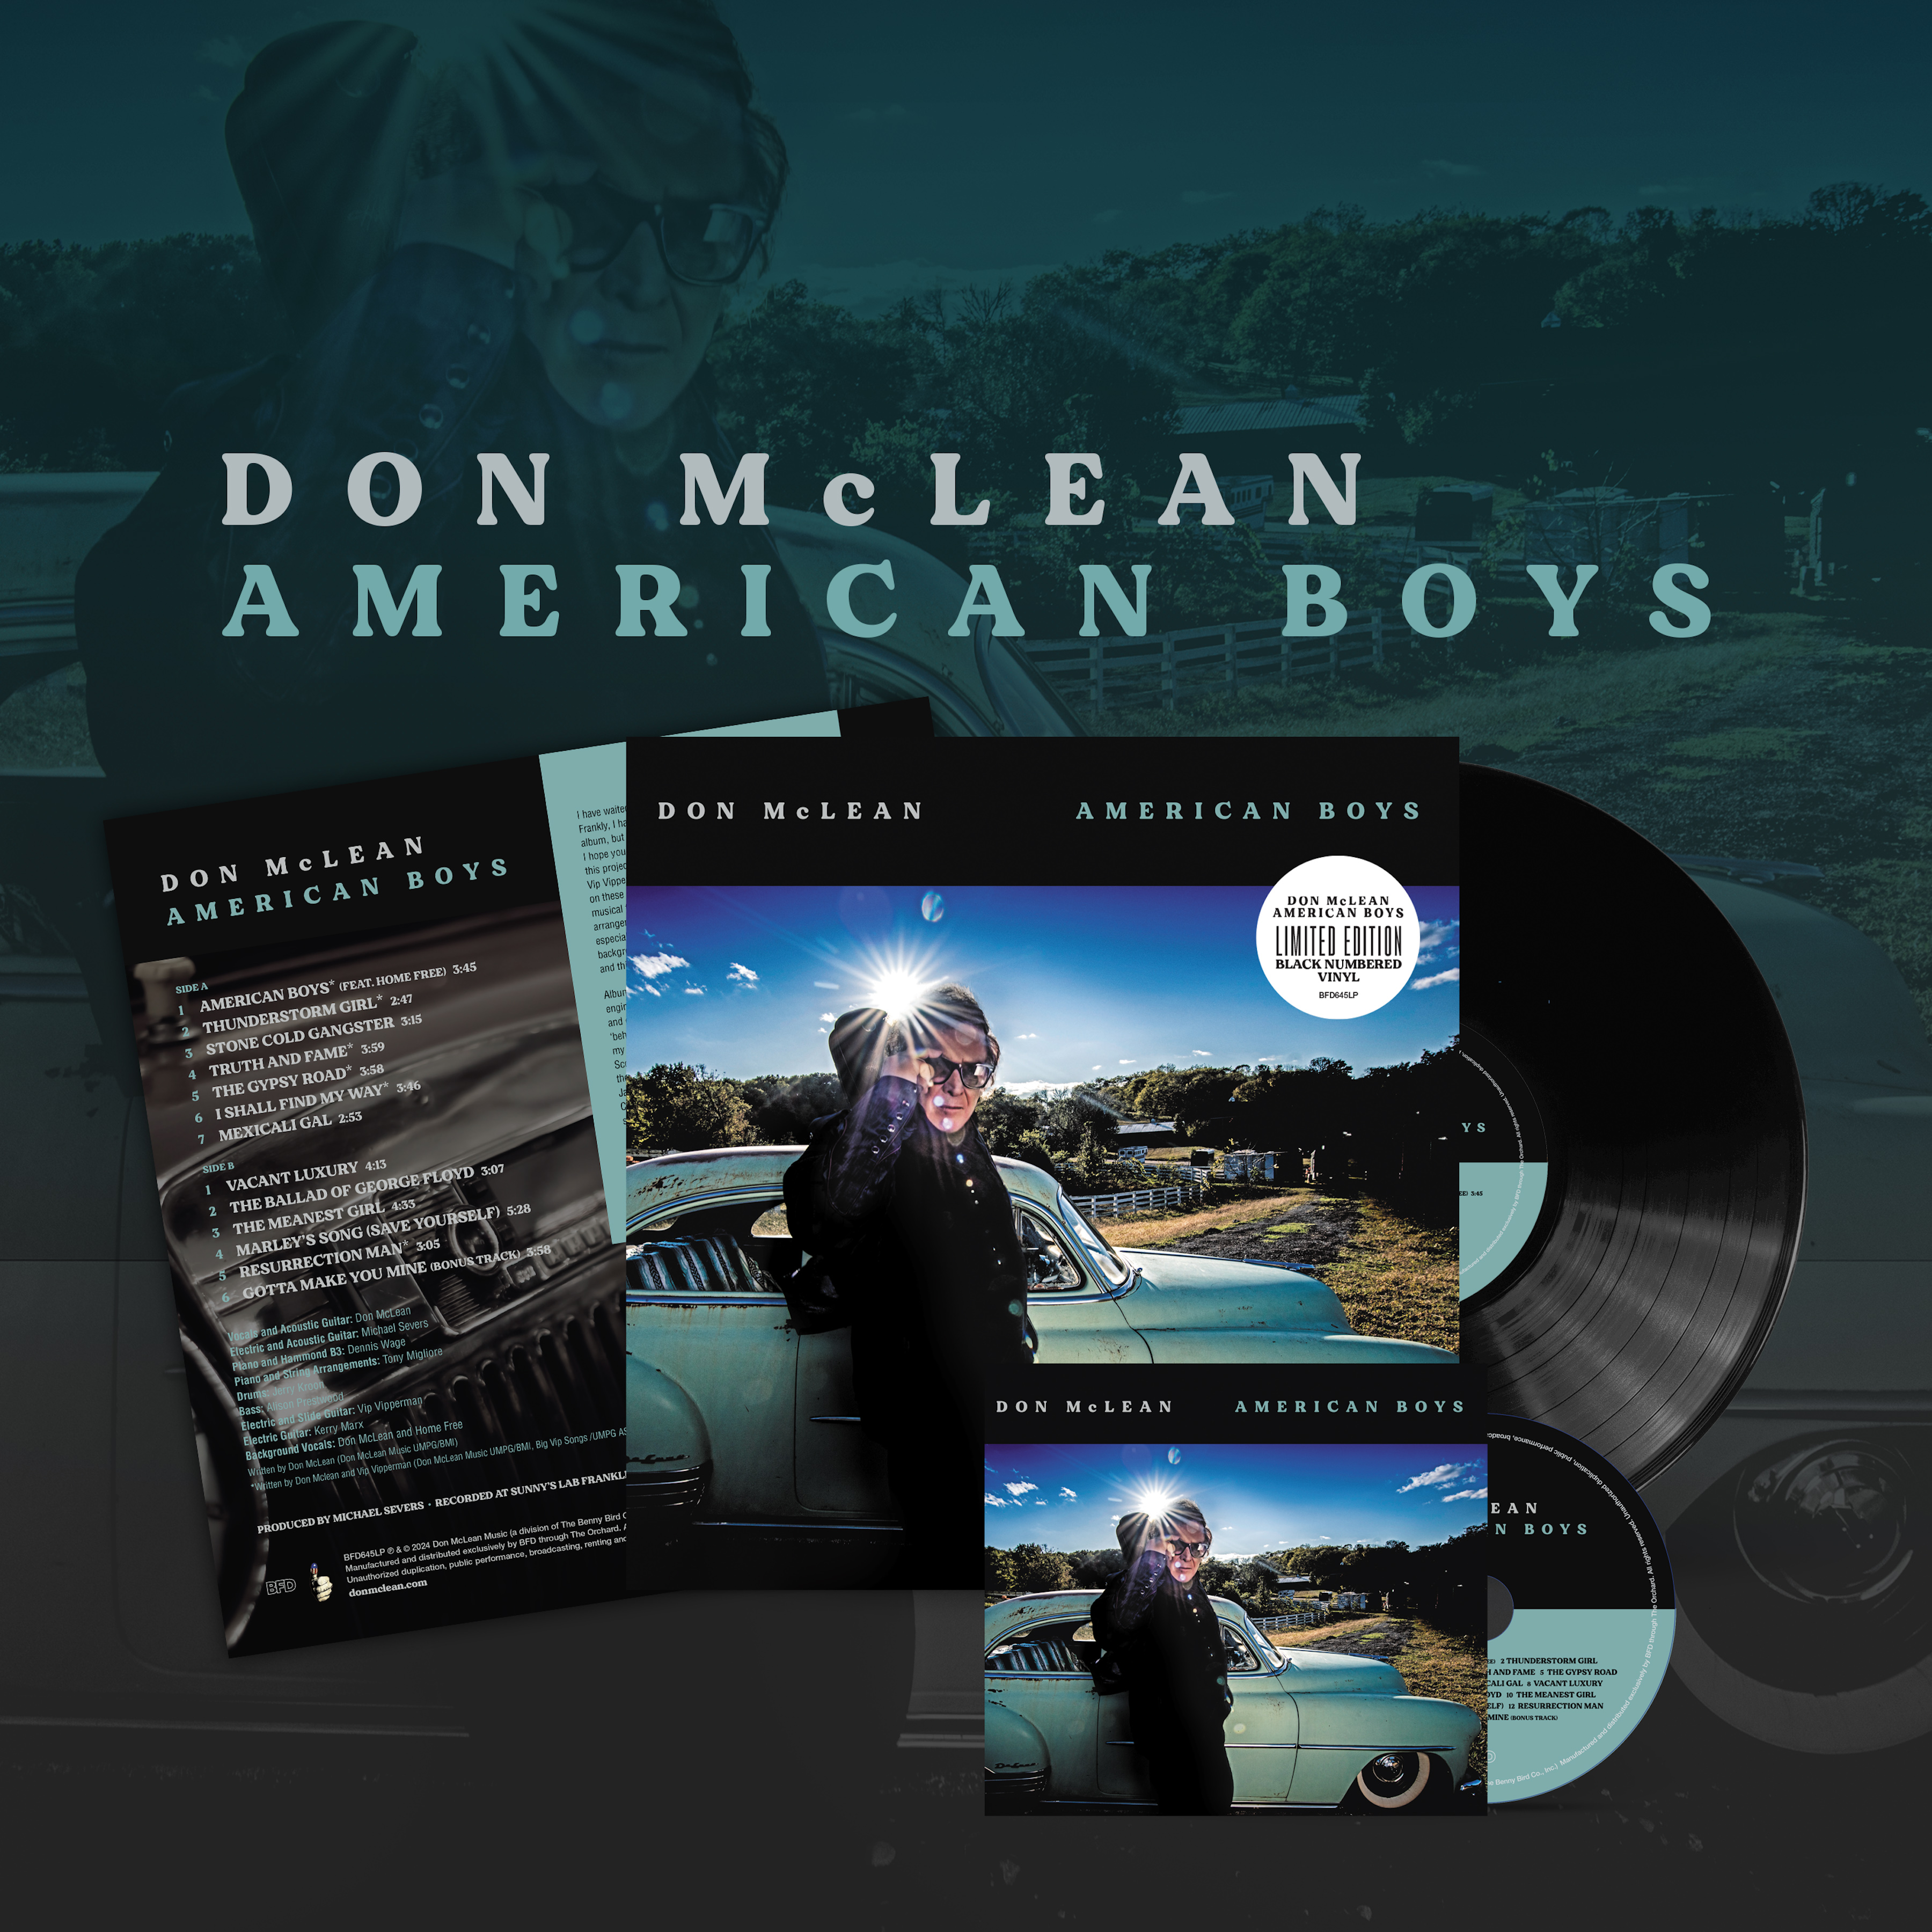 Don McLean's New Album, 'American Boys' Will Be Released On May 17th And Is Available For Pre-Order Today